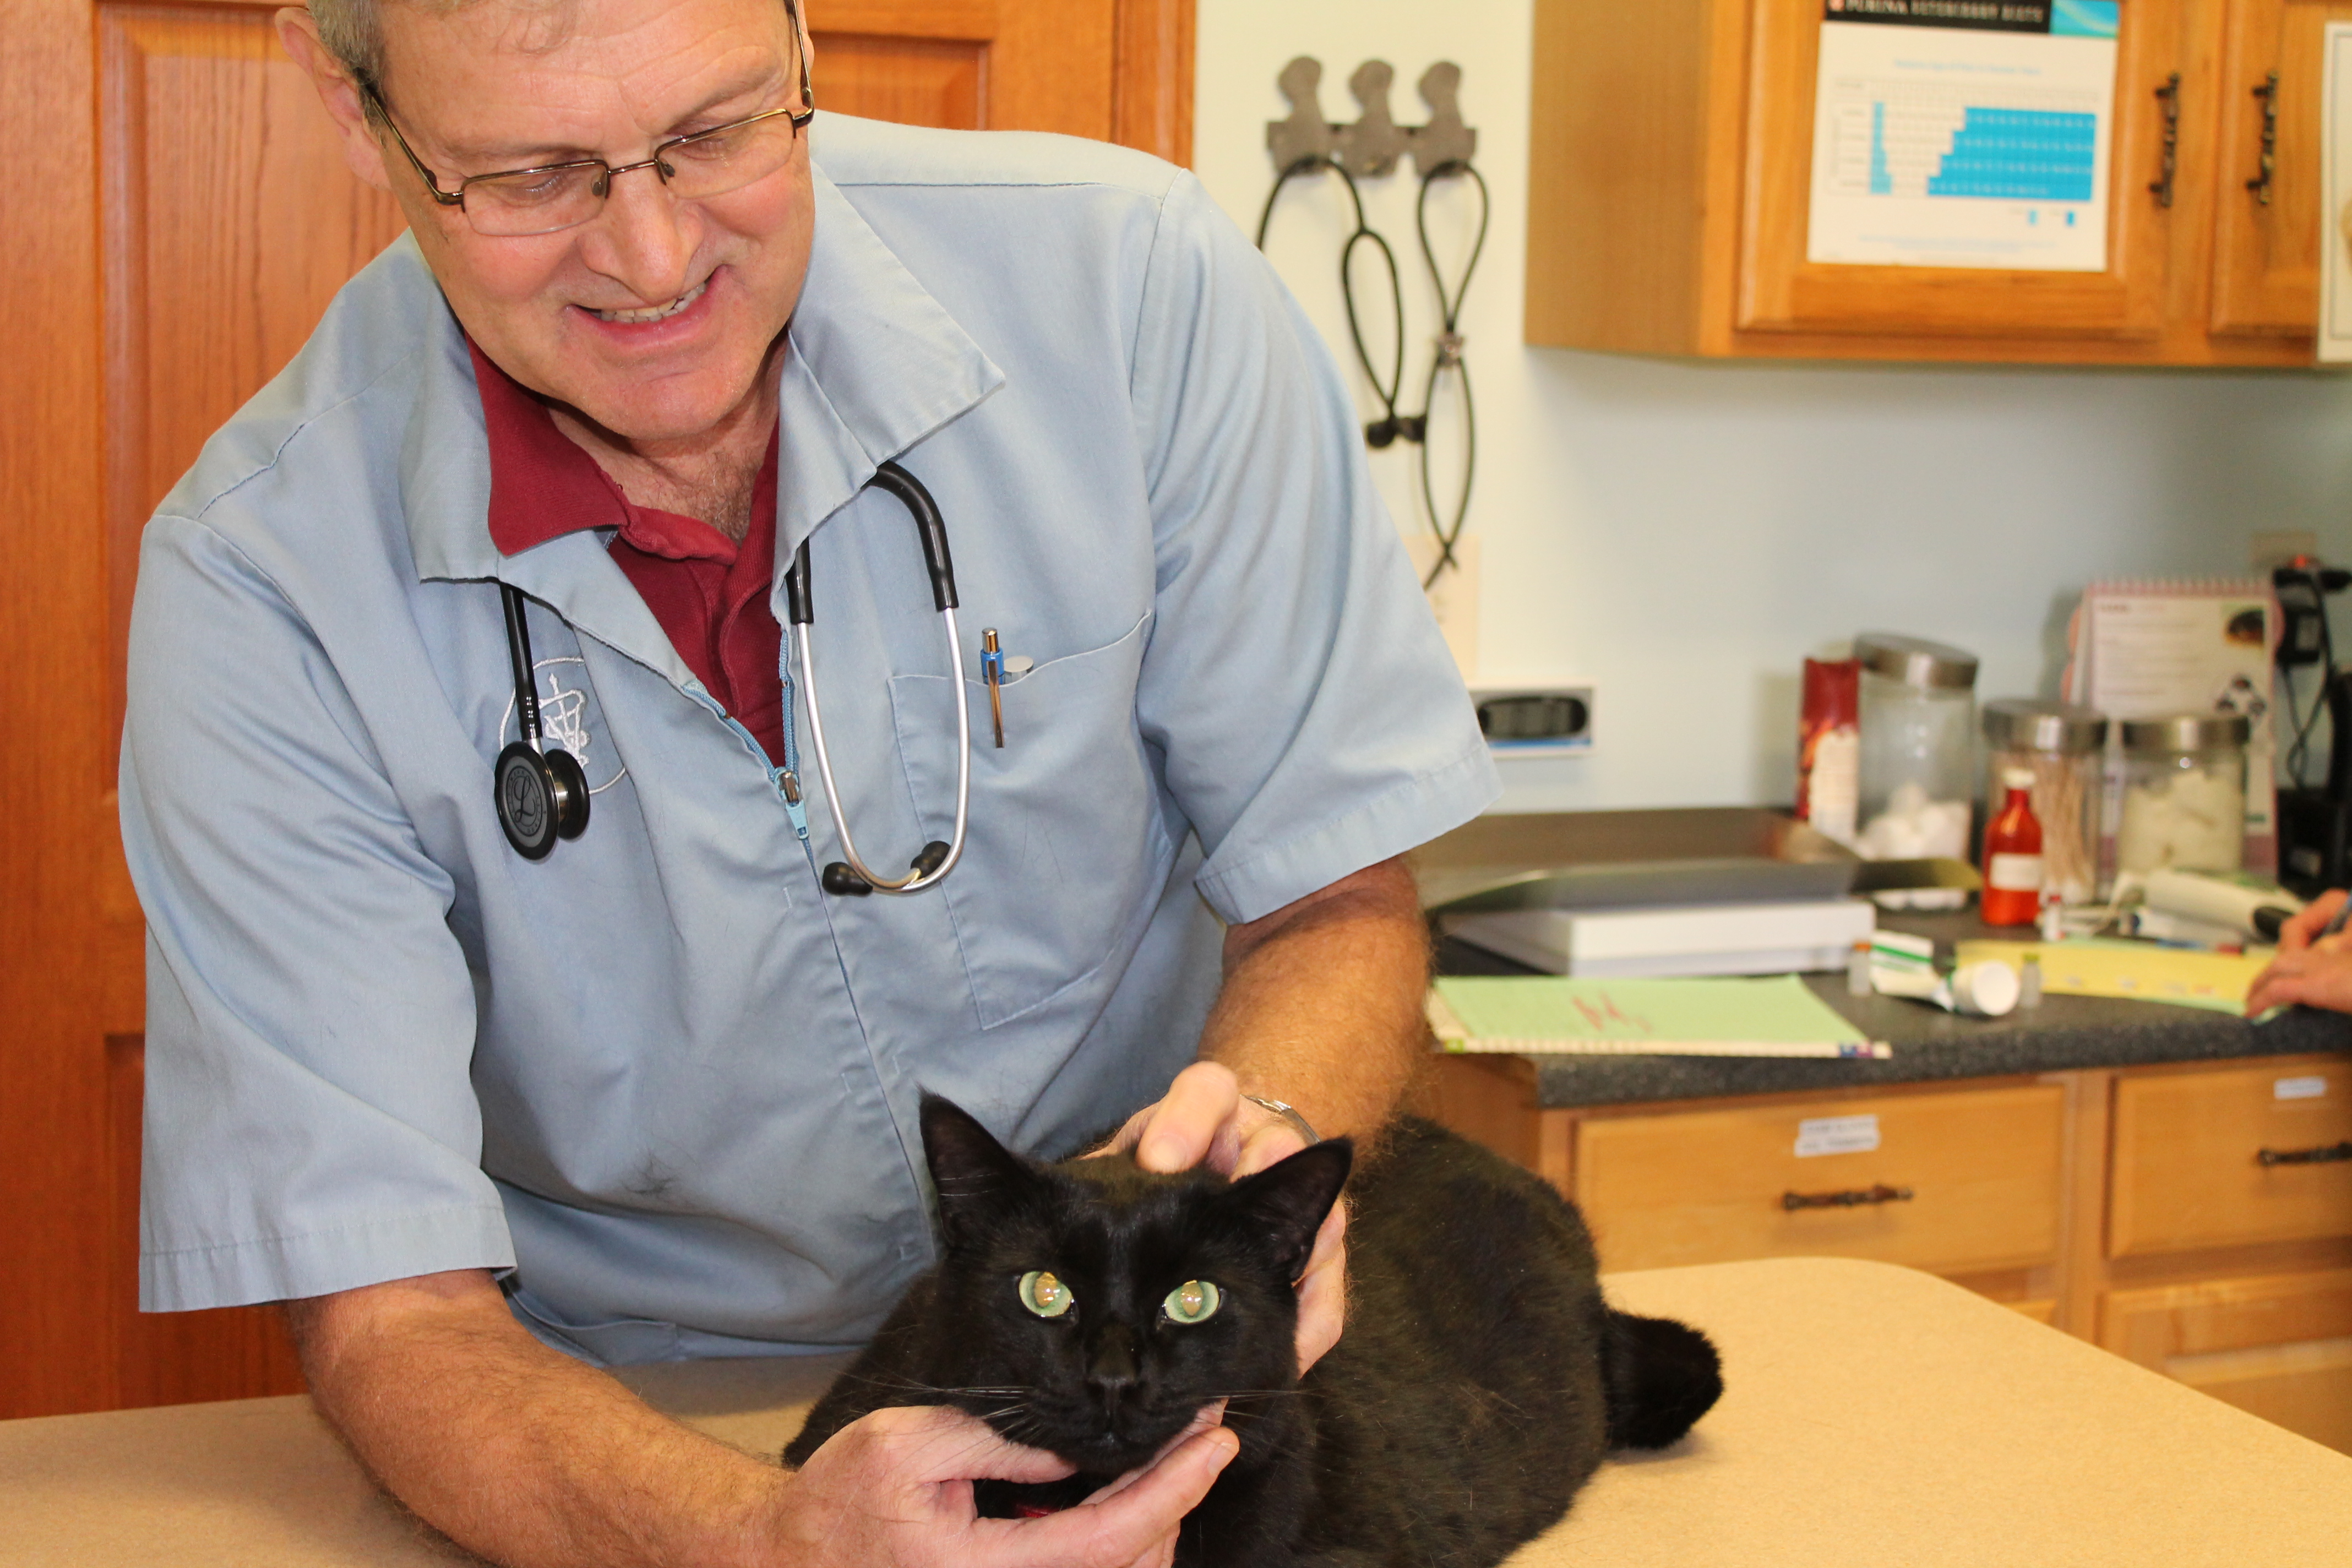 10 Things You Can Do to Make Veterinary Visits Better for Everyone